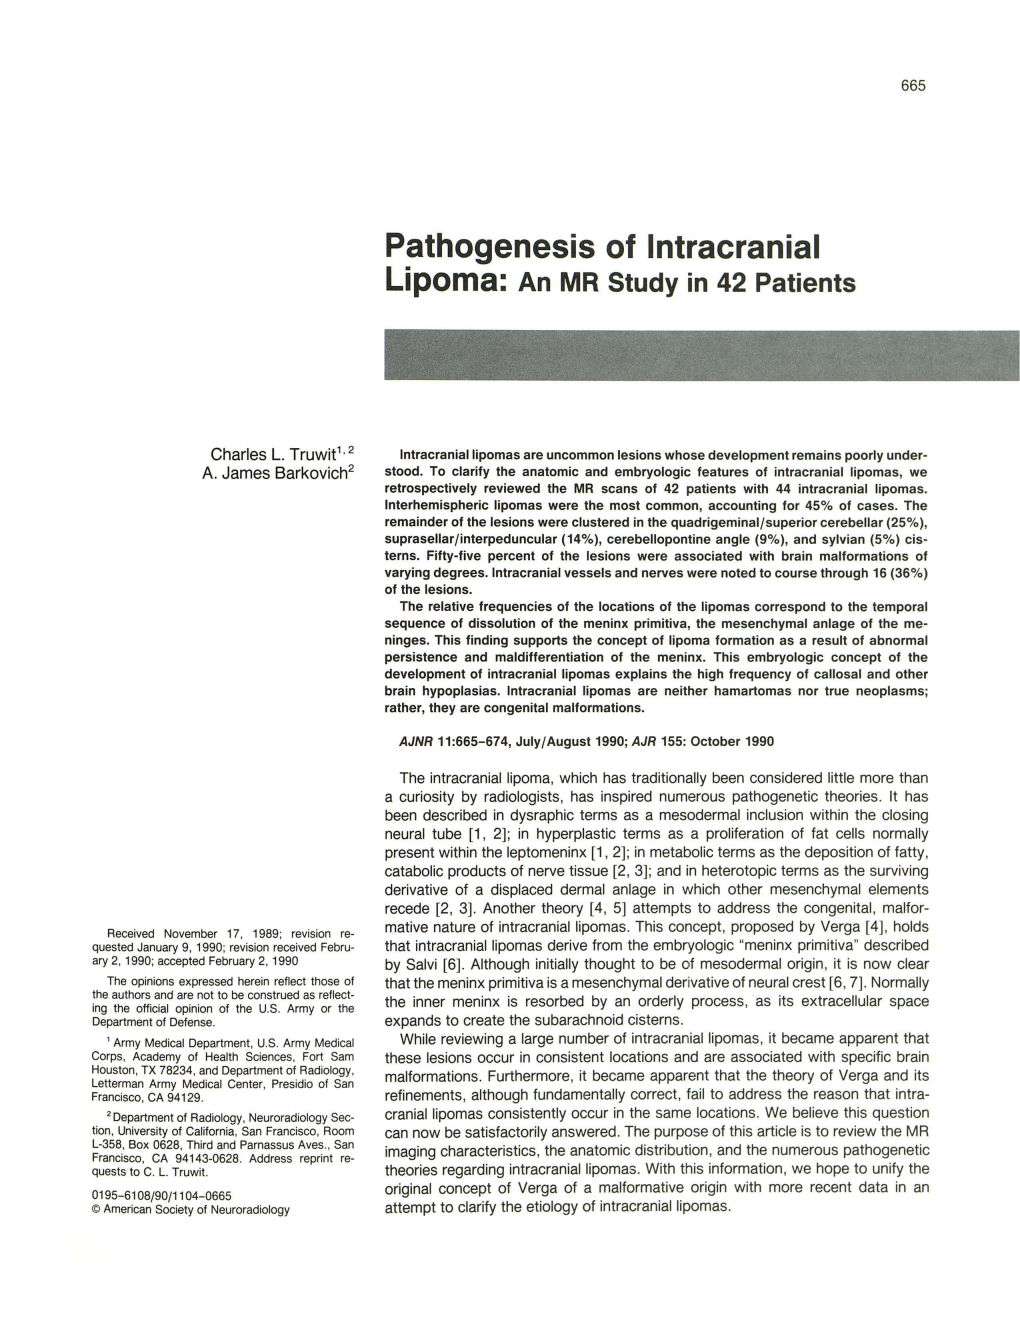 Pathogenesis of Intracranial Lipoma: an MR Study in 42 Patients